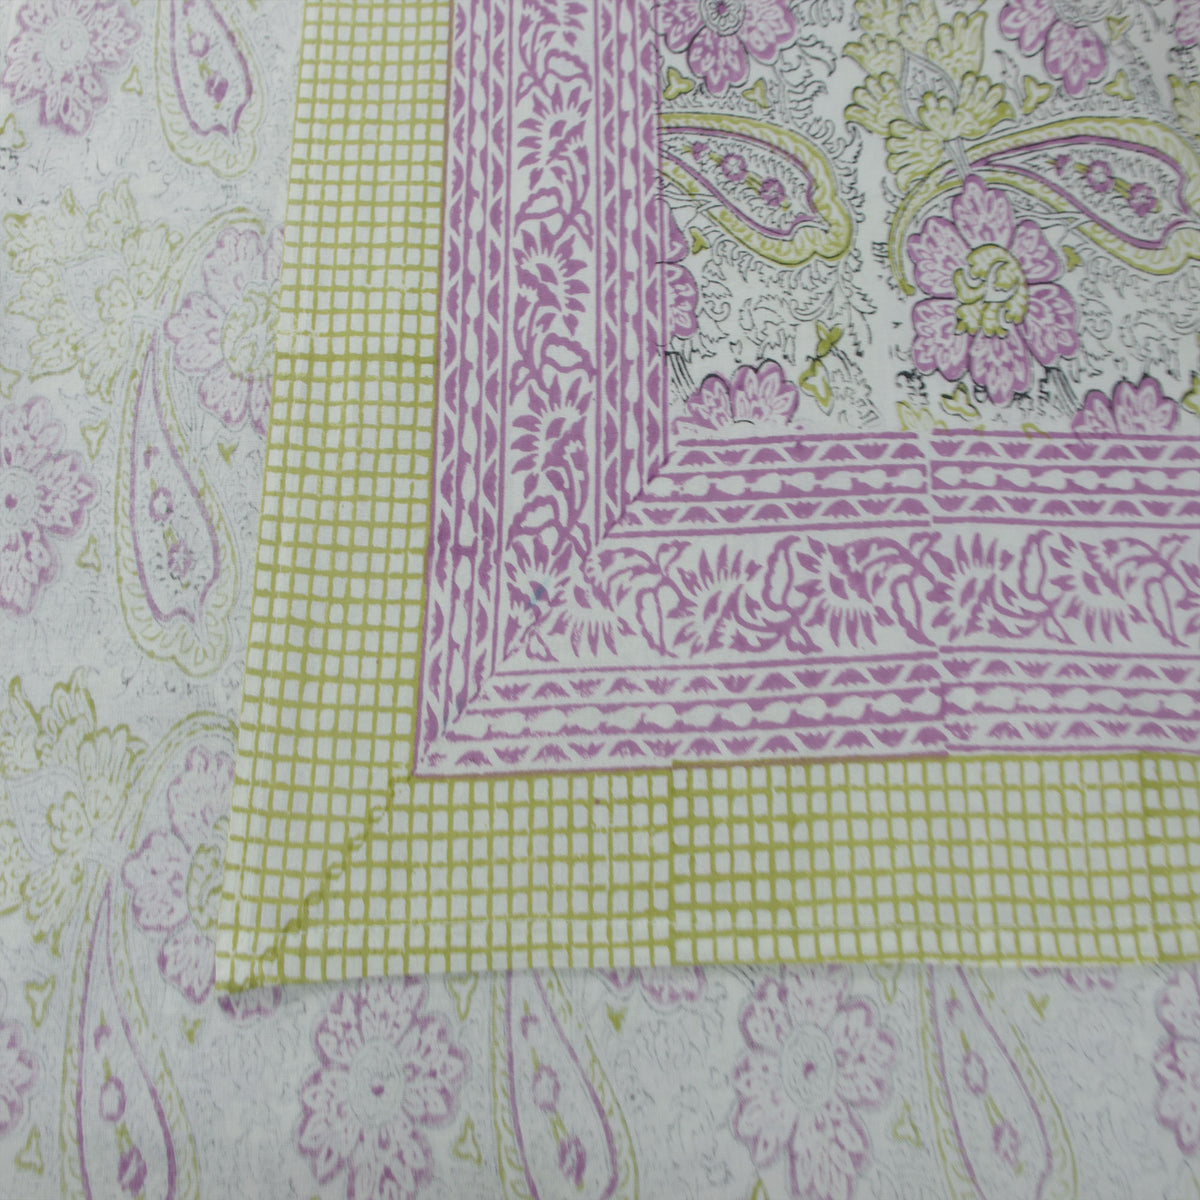 Block Printed Rectangle Tablecloth Table Cover - Purple & Green  Paisley